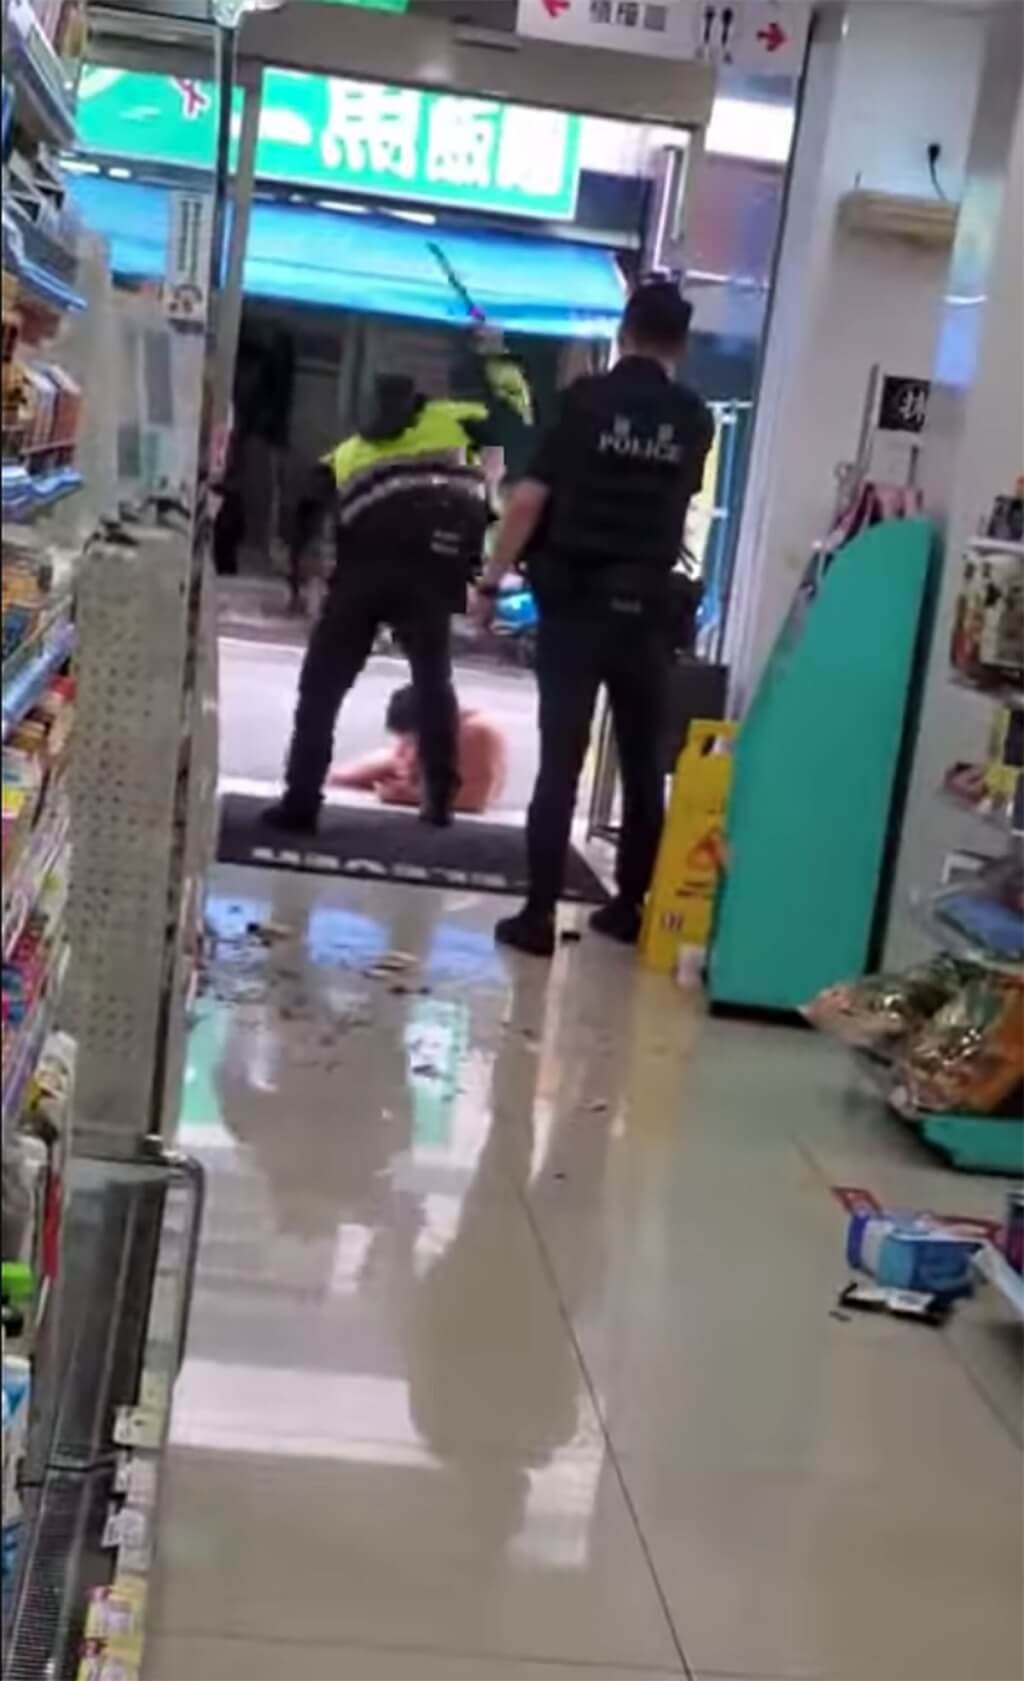 One of the policemen holds his baton high at the entrance of the store in Taoyaun